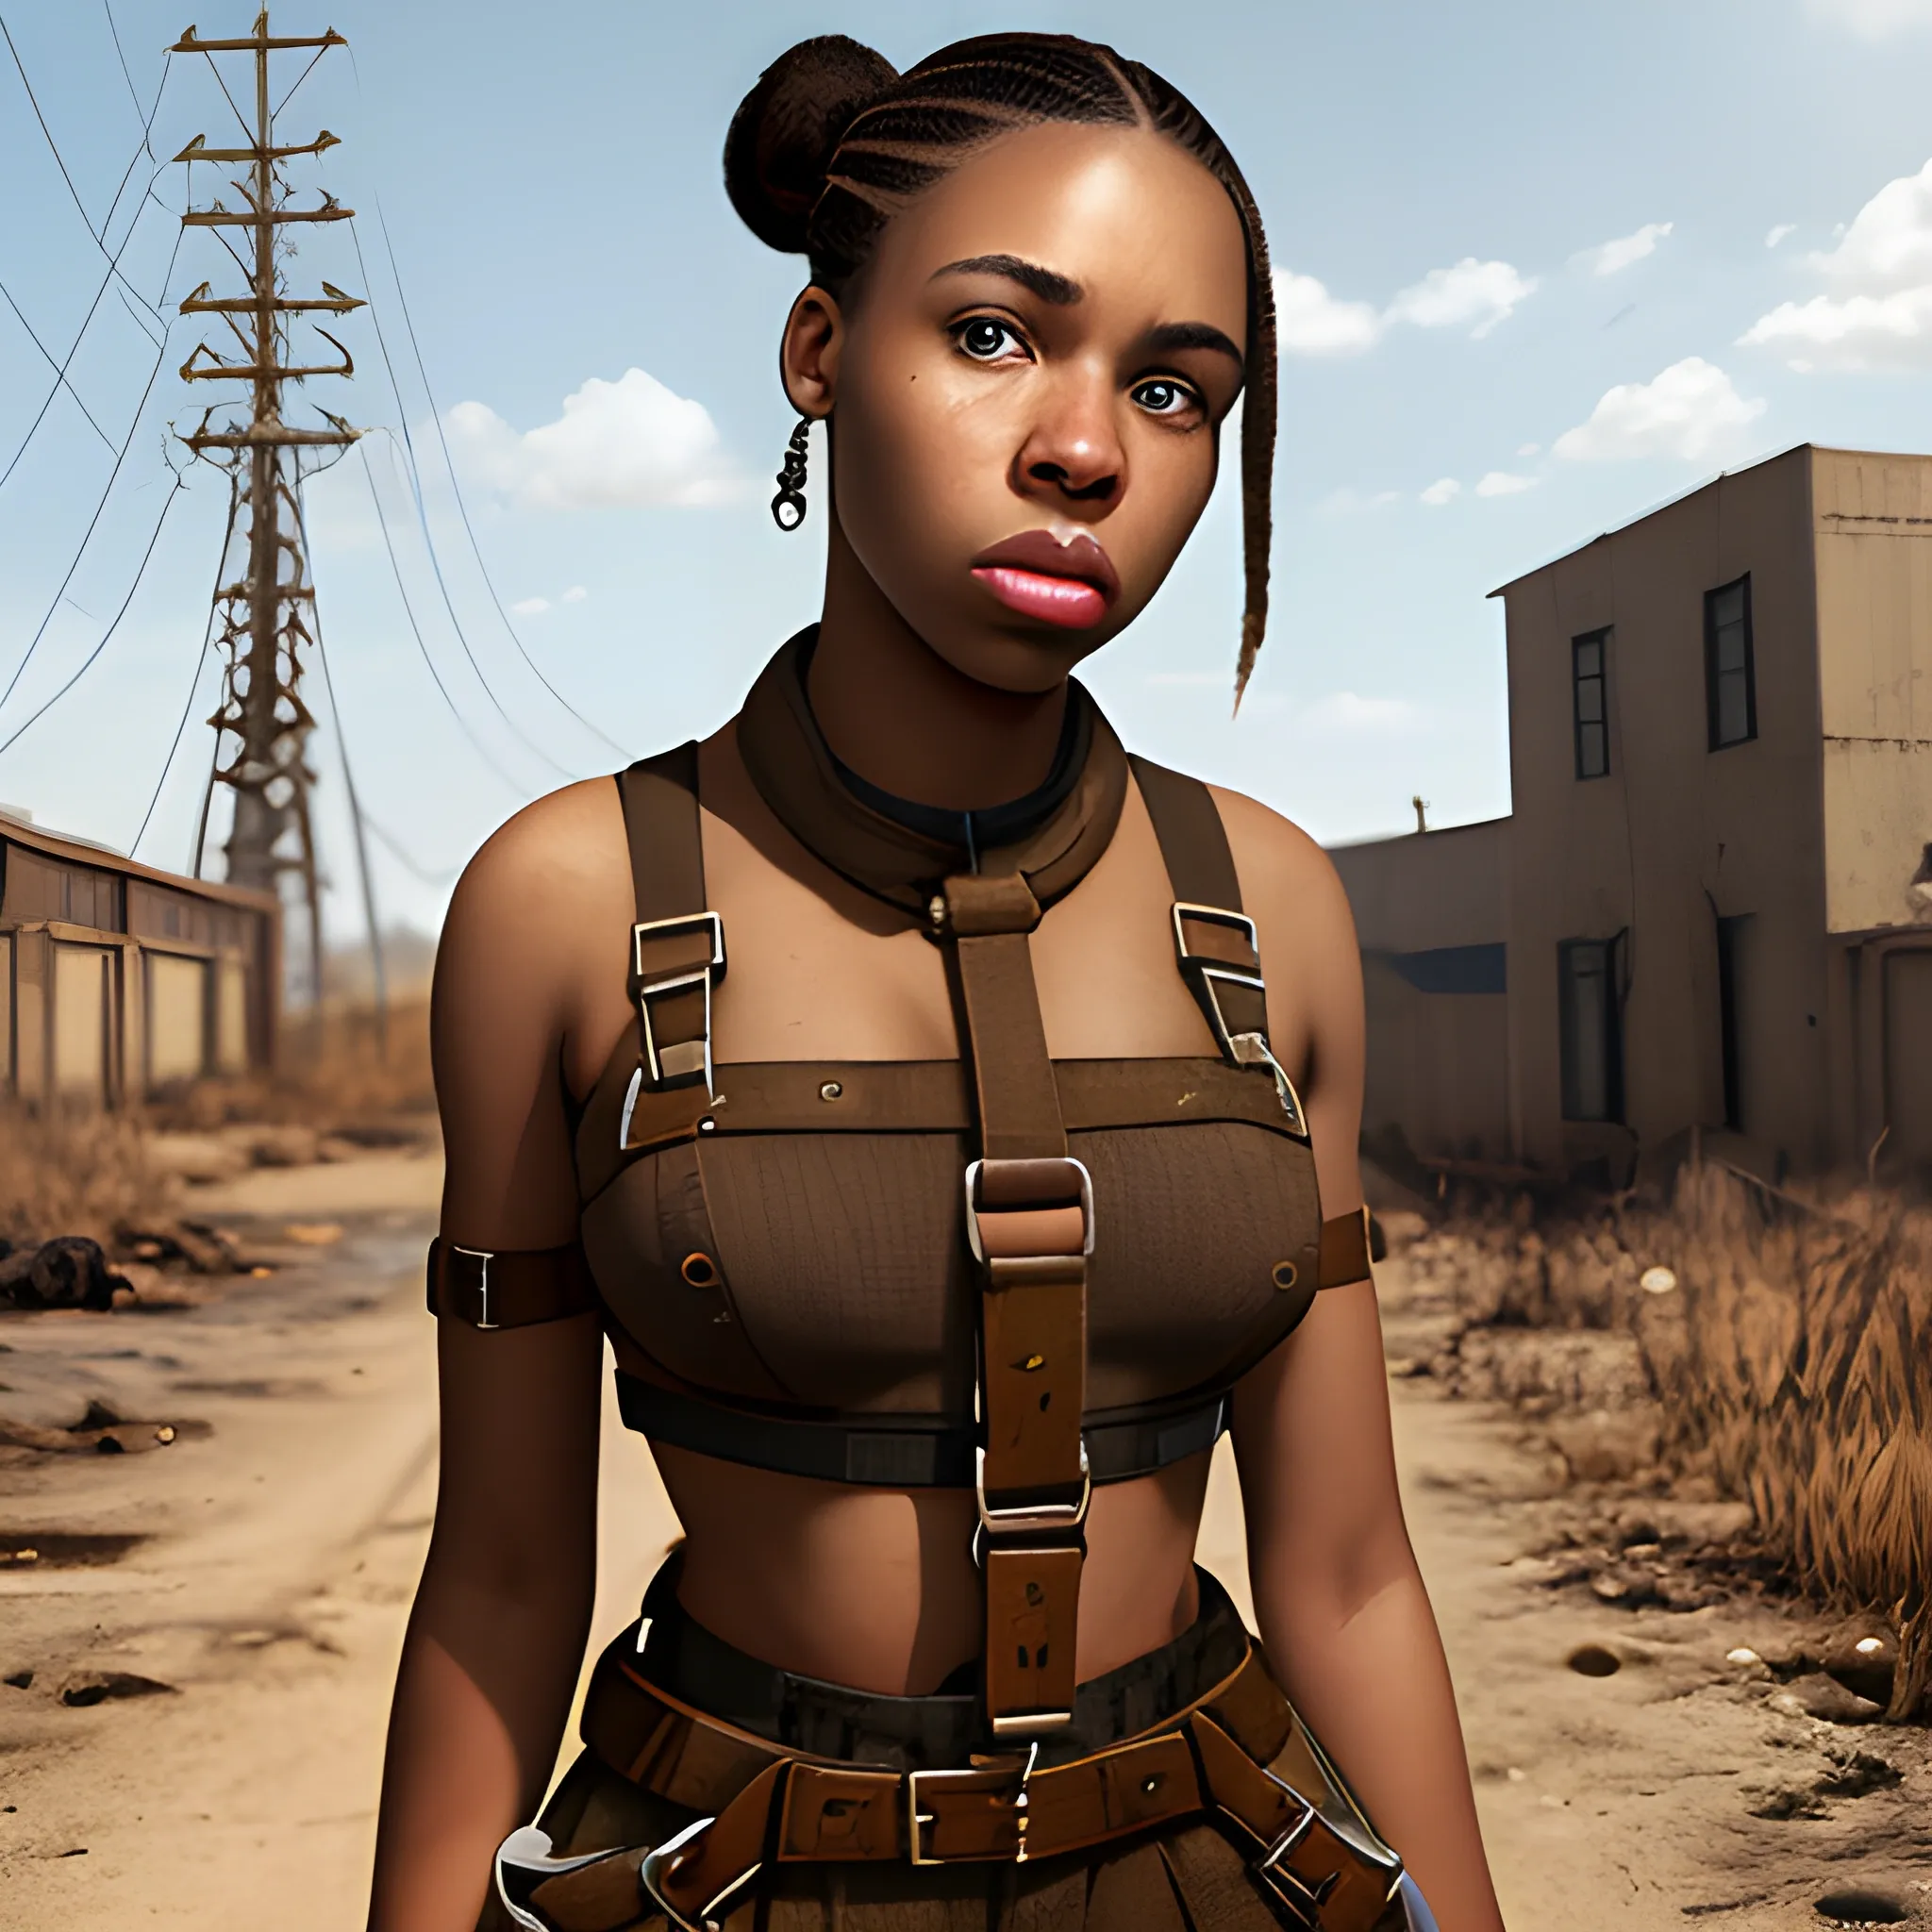 In the style of fallout 1, (masterpiece), (portrait photography), (portrait of 20 years old African-American female), no makeup, flat chested, harness outfit made out of straps, ponytail, brown hair, brown eyes